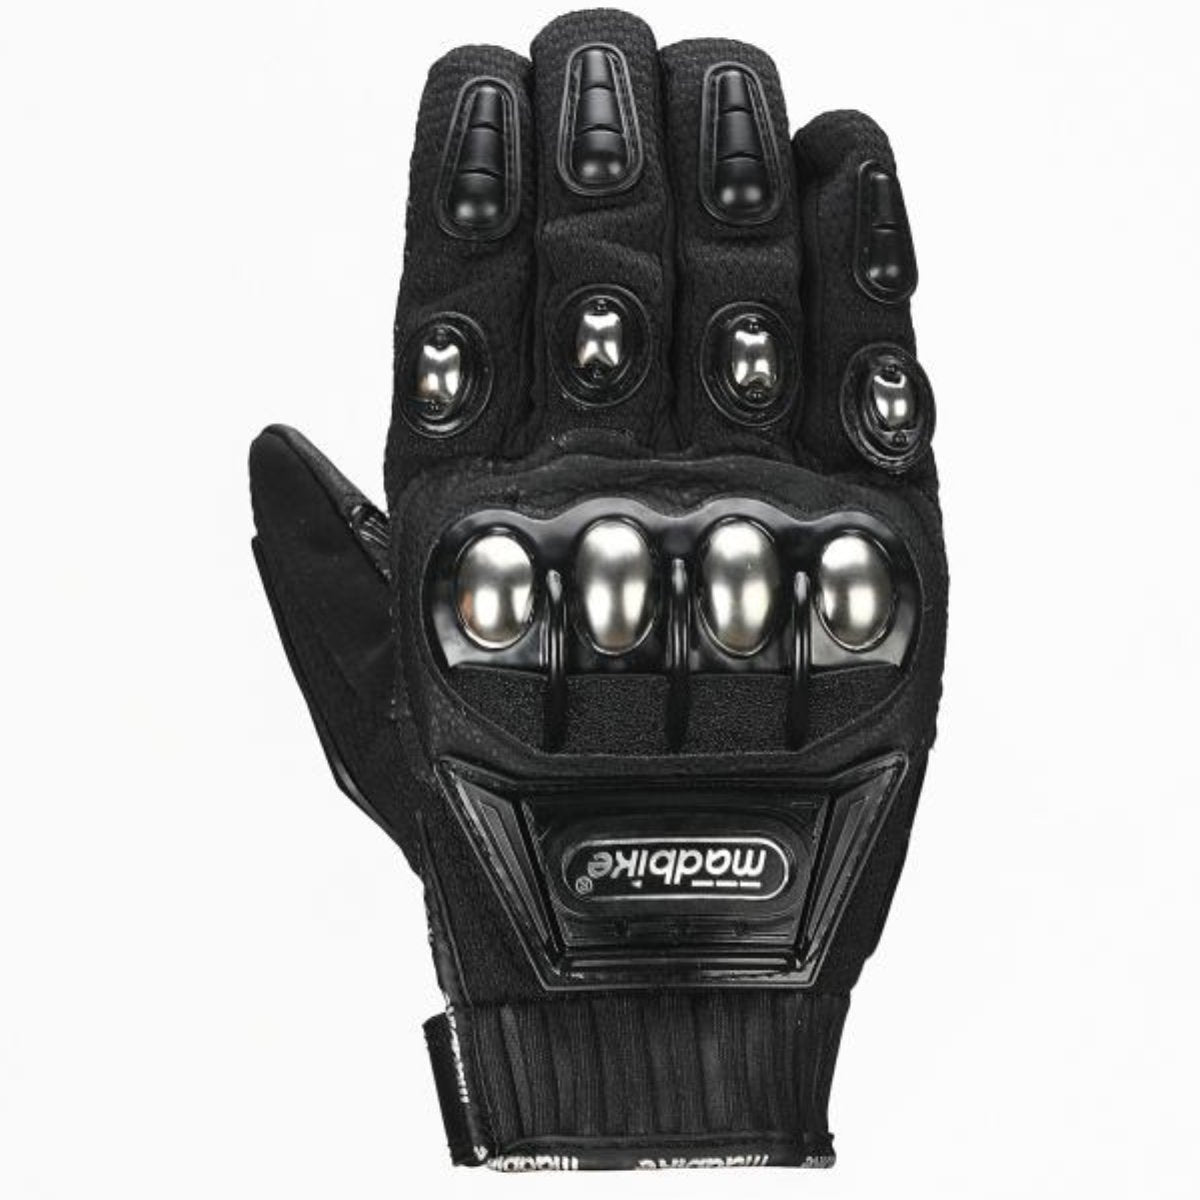 Madbike, full protection, black motorcycle gloves with silver buttons.